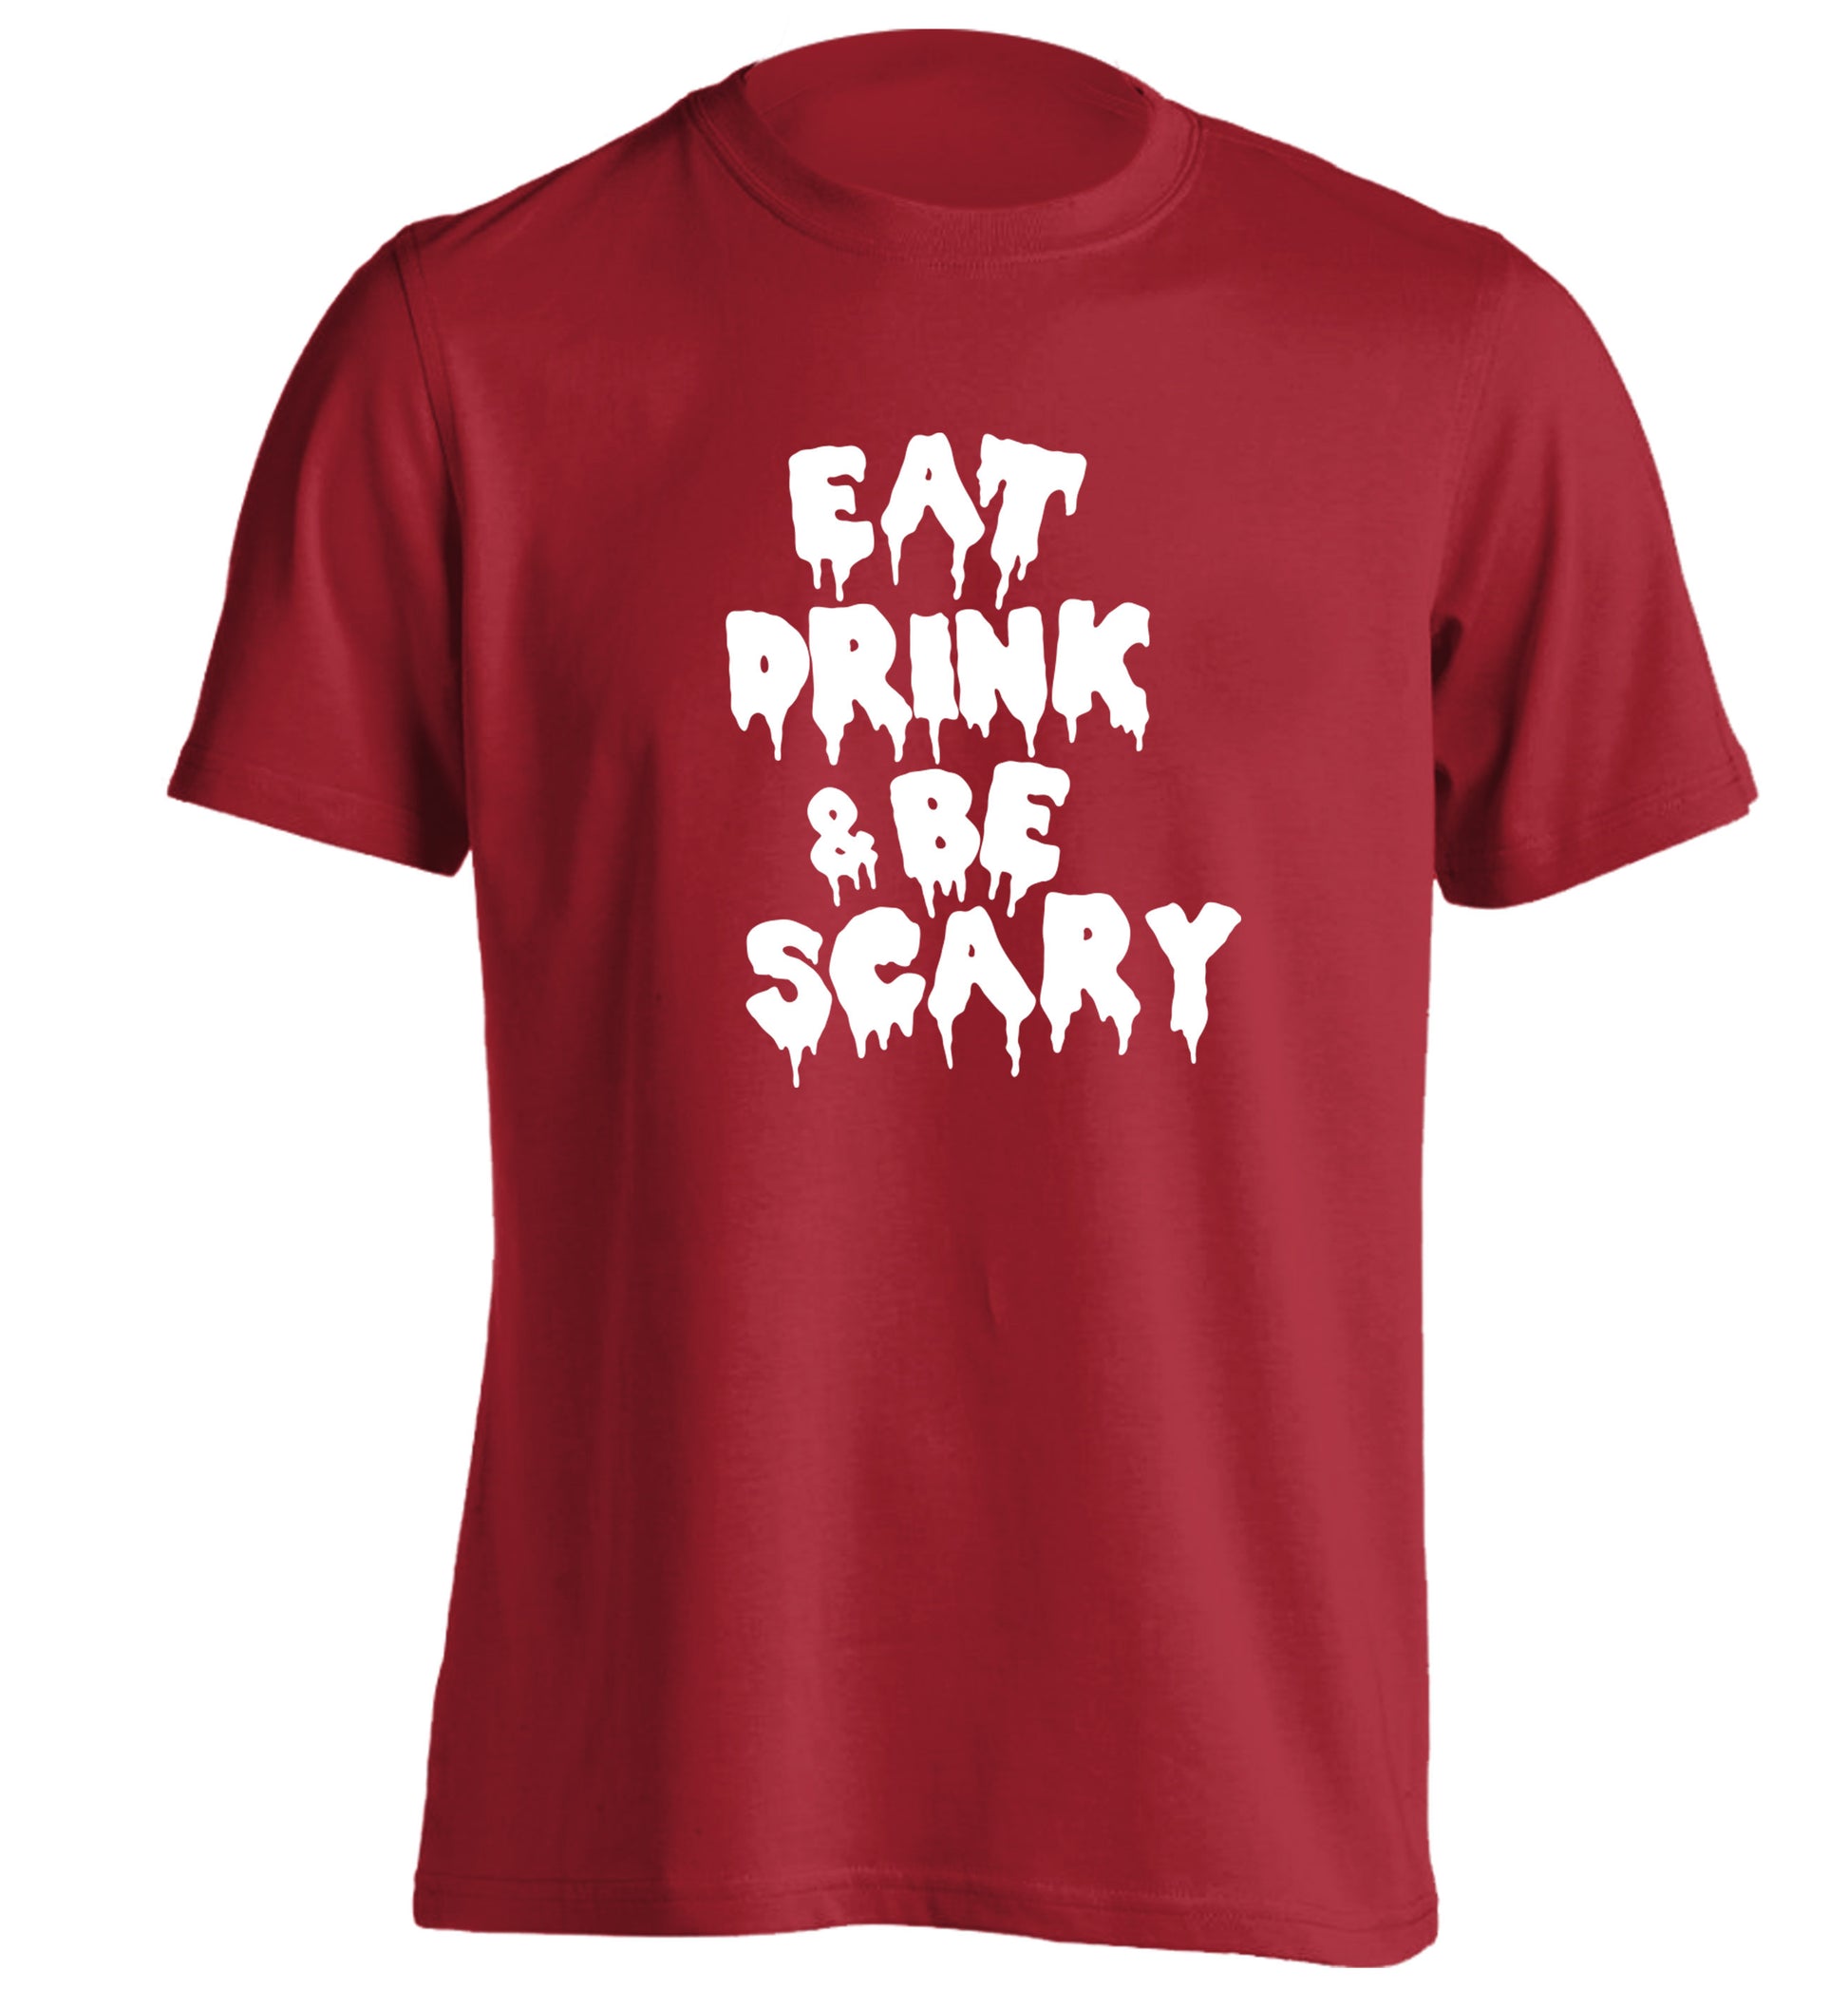 Eat drink and be scary adults unisex red Tshirt 2XL